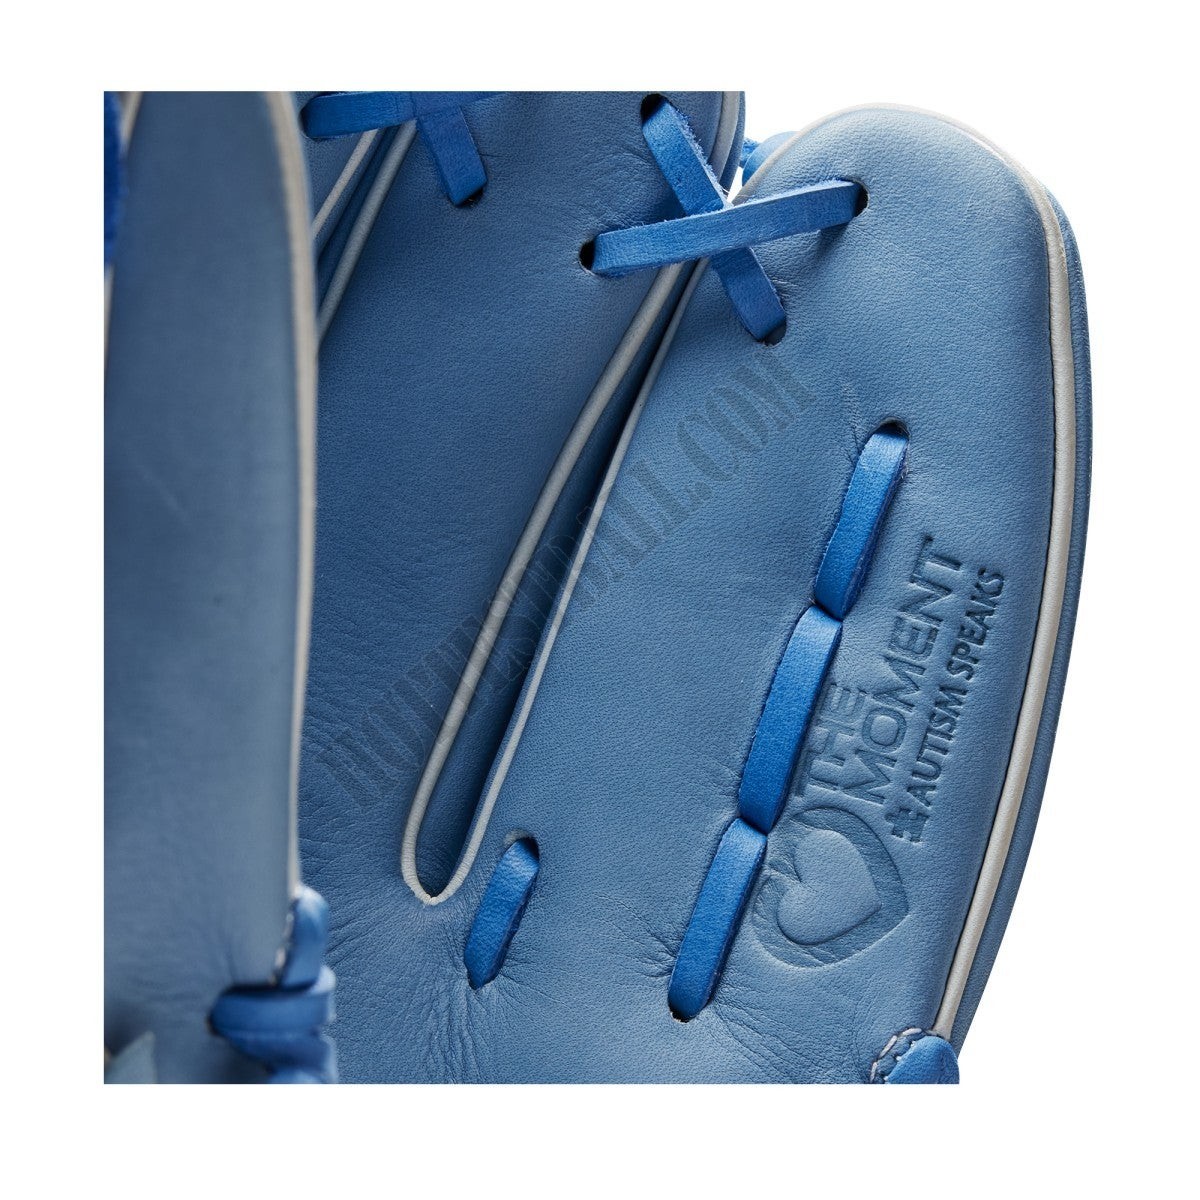 2020 Autism Speaks A2000 1786 11.5" Infield Baseball Glove - Limited Edition ● Wilson Promotions - -8